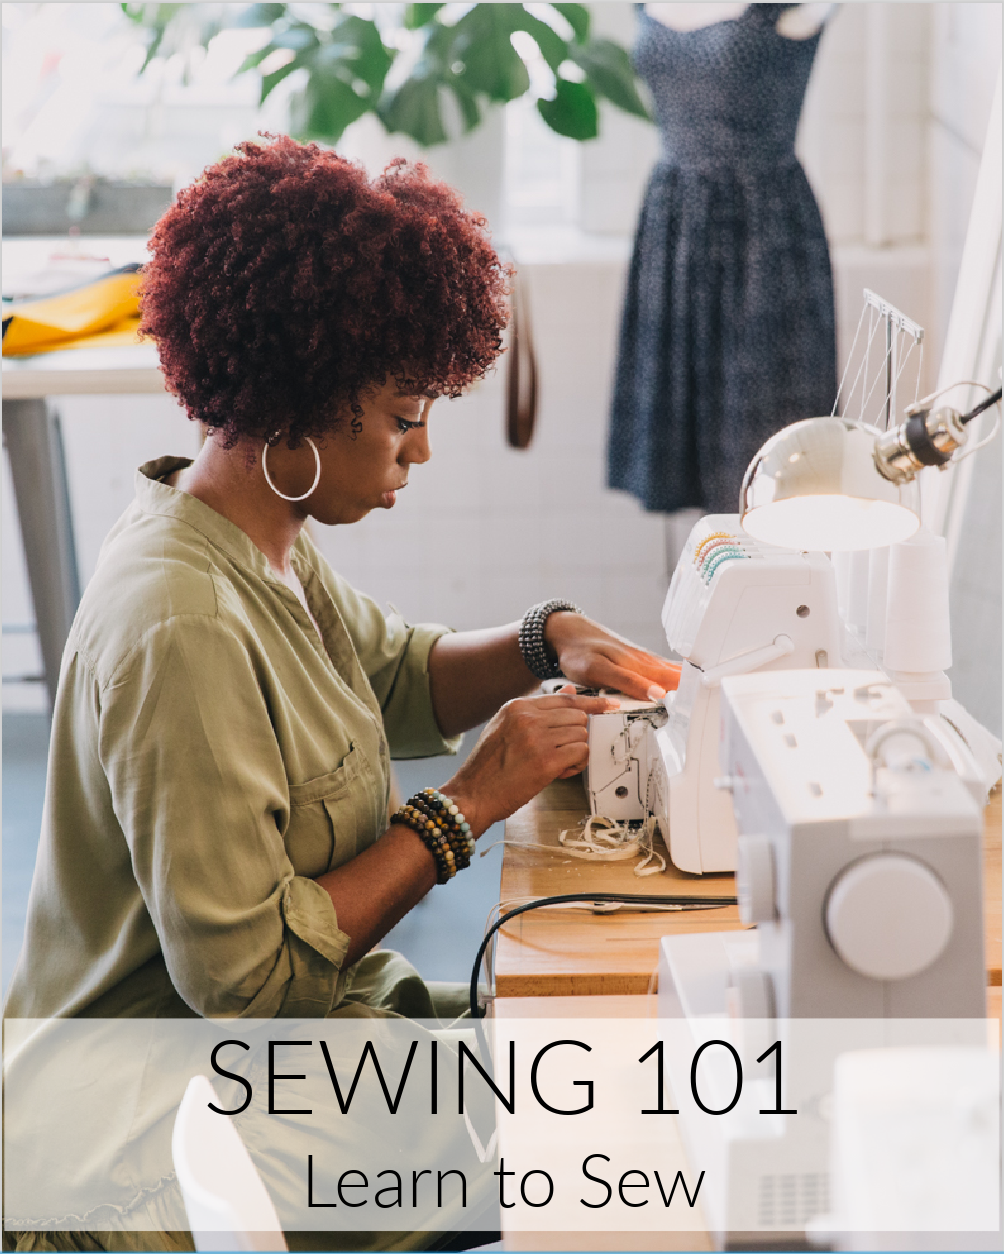 Sewing 101: Learn to Sew – Butcher's Sew Shop